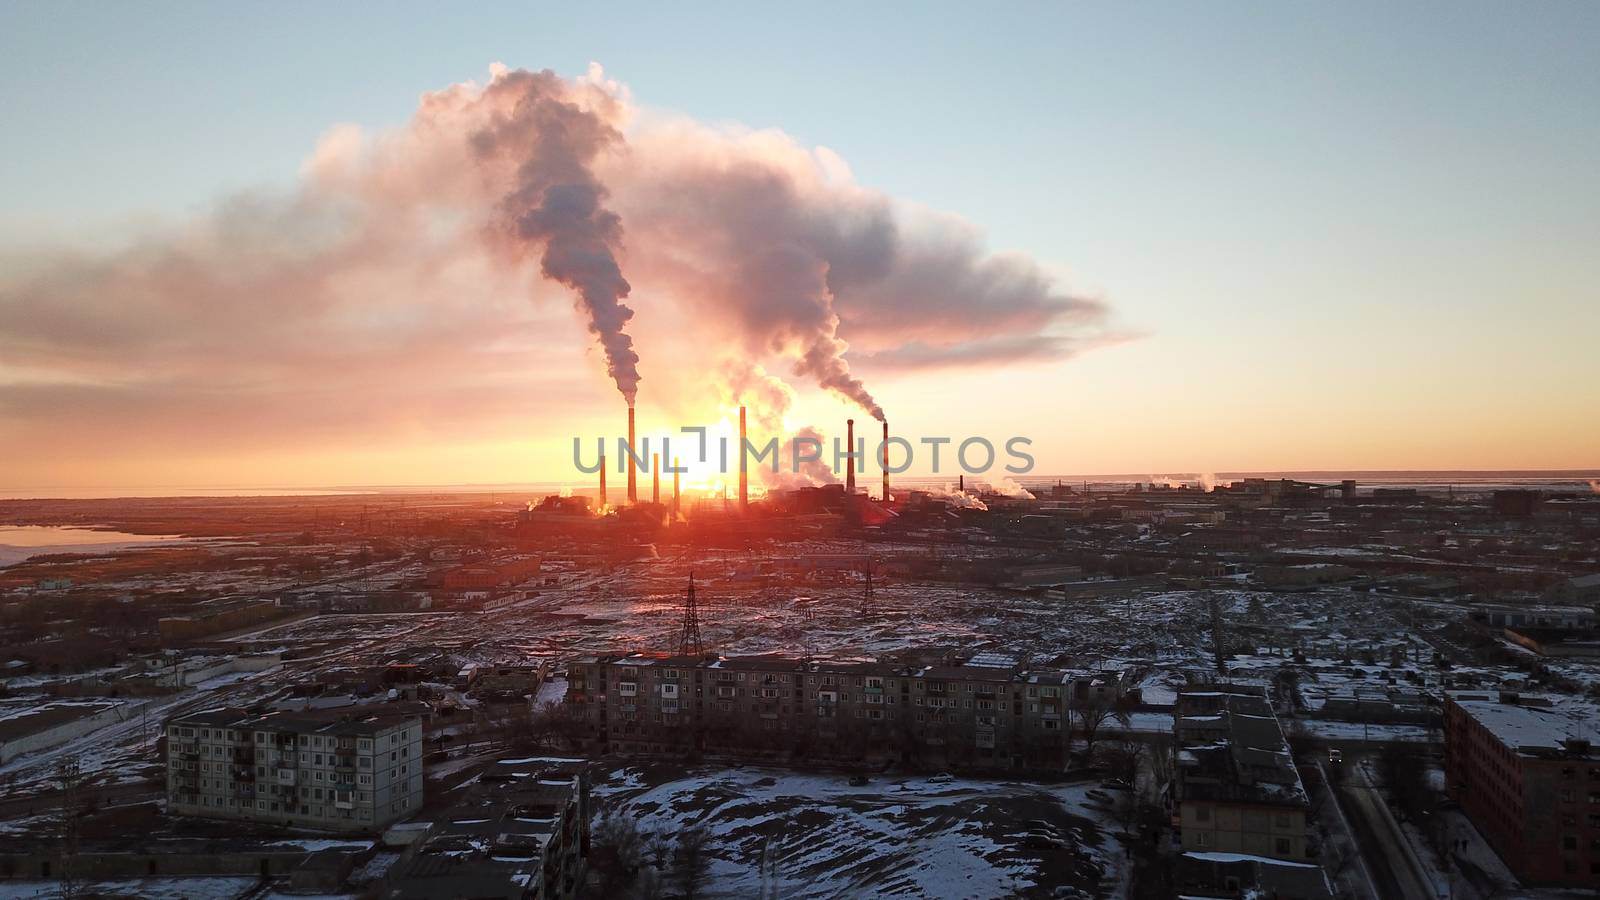 Epic sunset on the background of a Smoking factory. The red sun with bright rays goes beyond the pipe factories and smog. Shooting with the drone. View of part of the city, lake and industry. Red sky